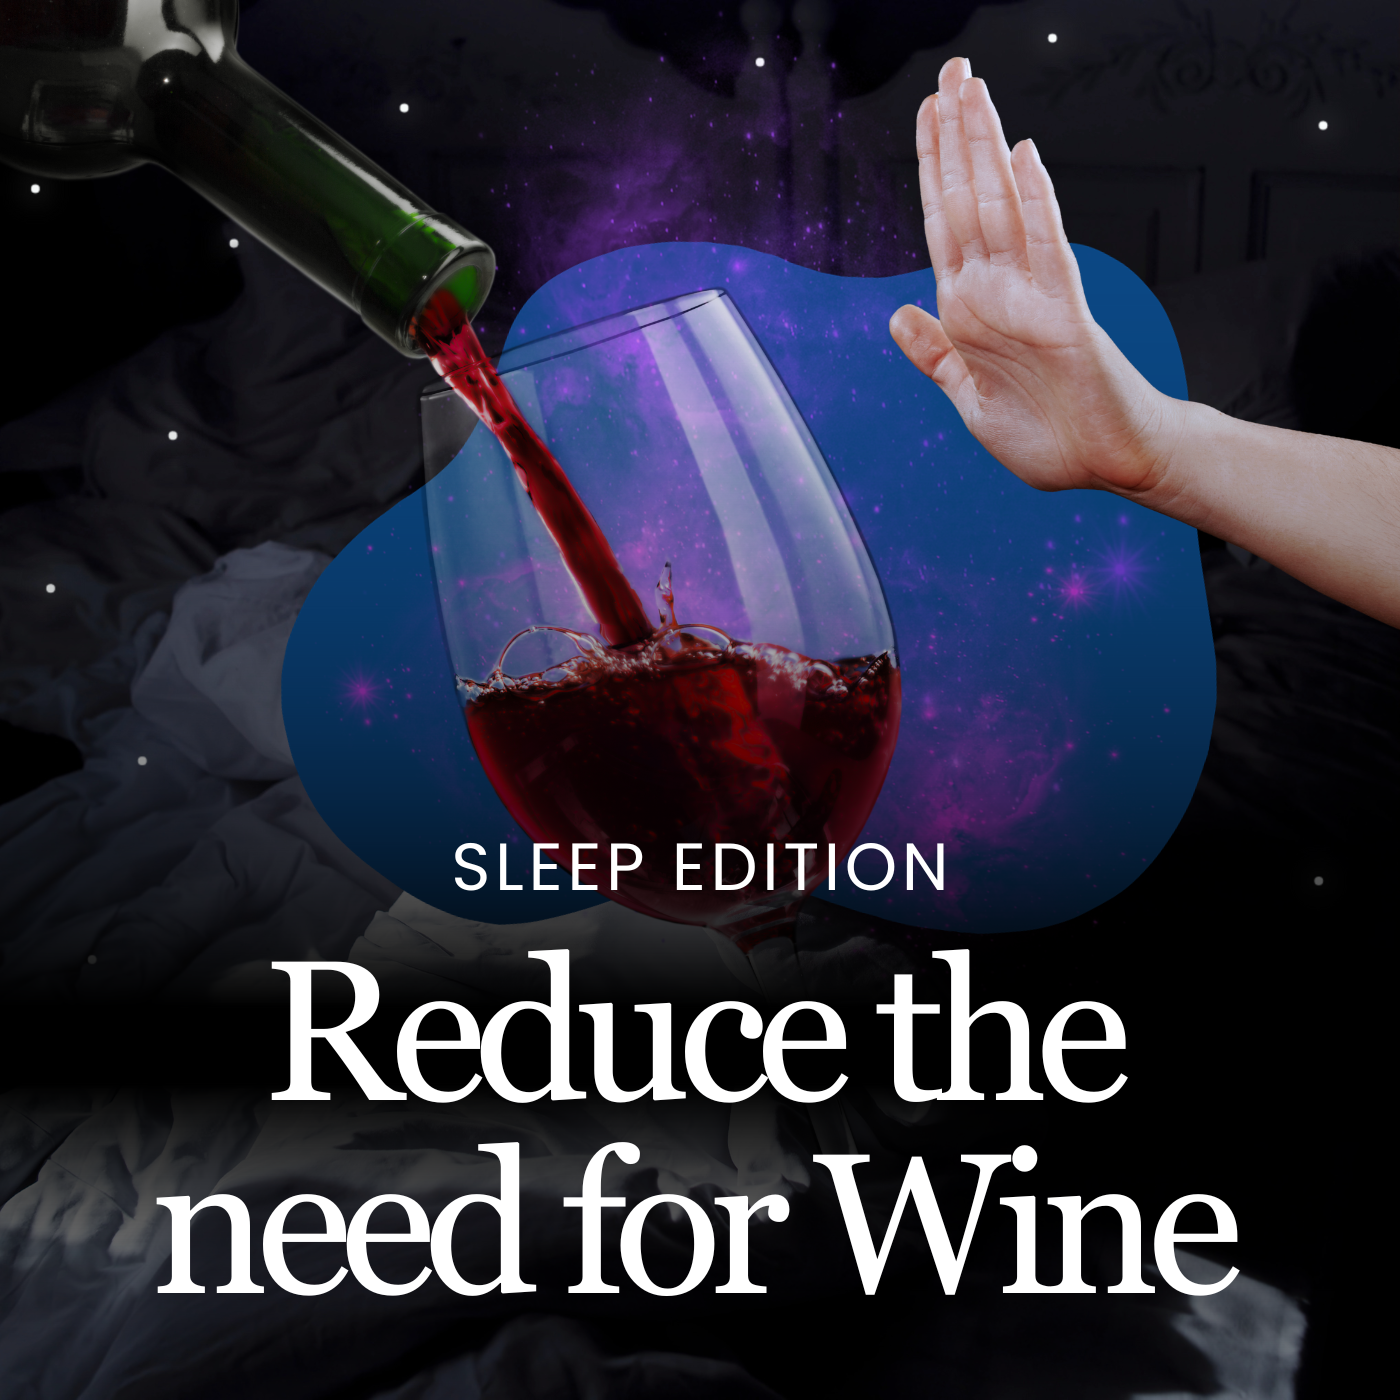 Reduce the need for wine hypnotherapy - Sleep Edition